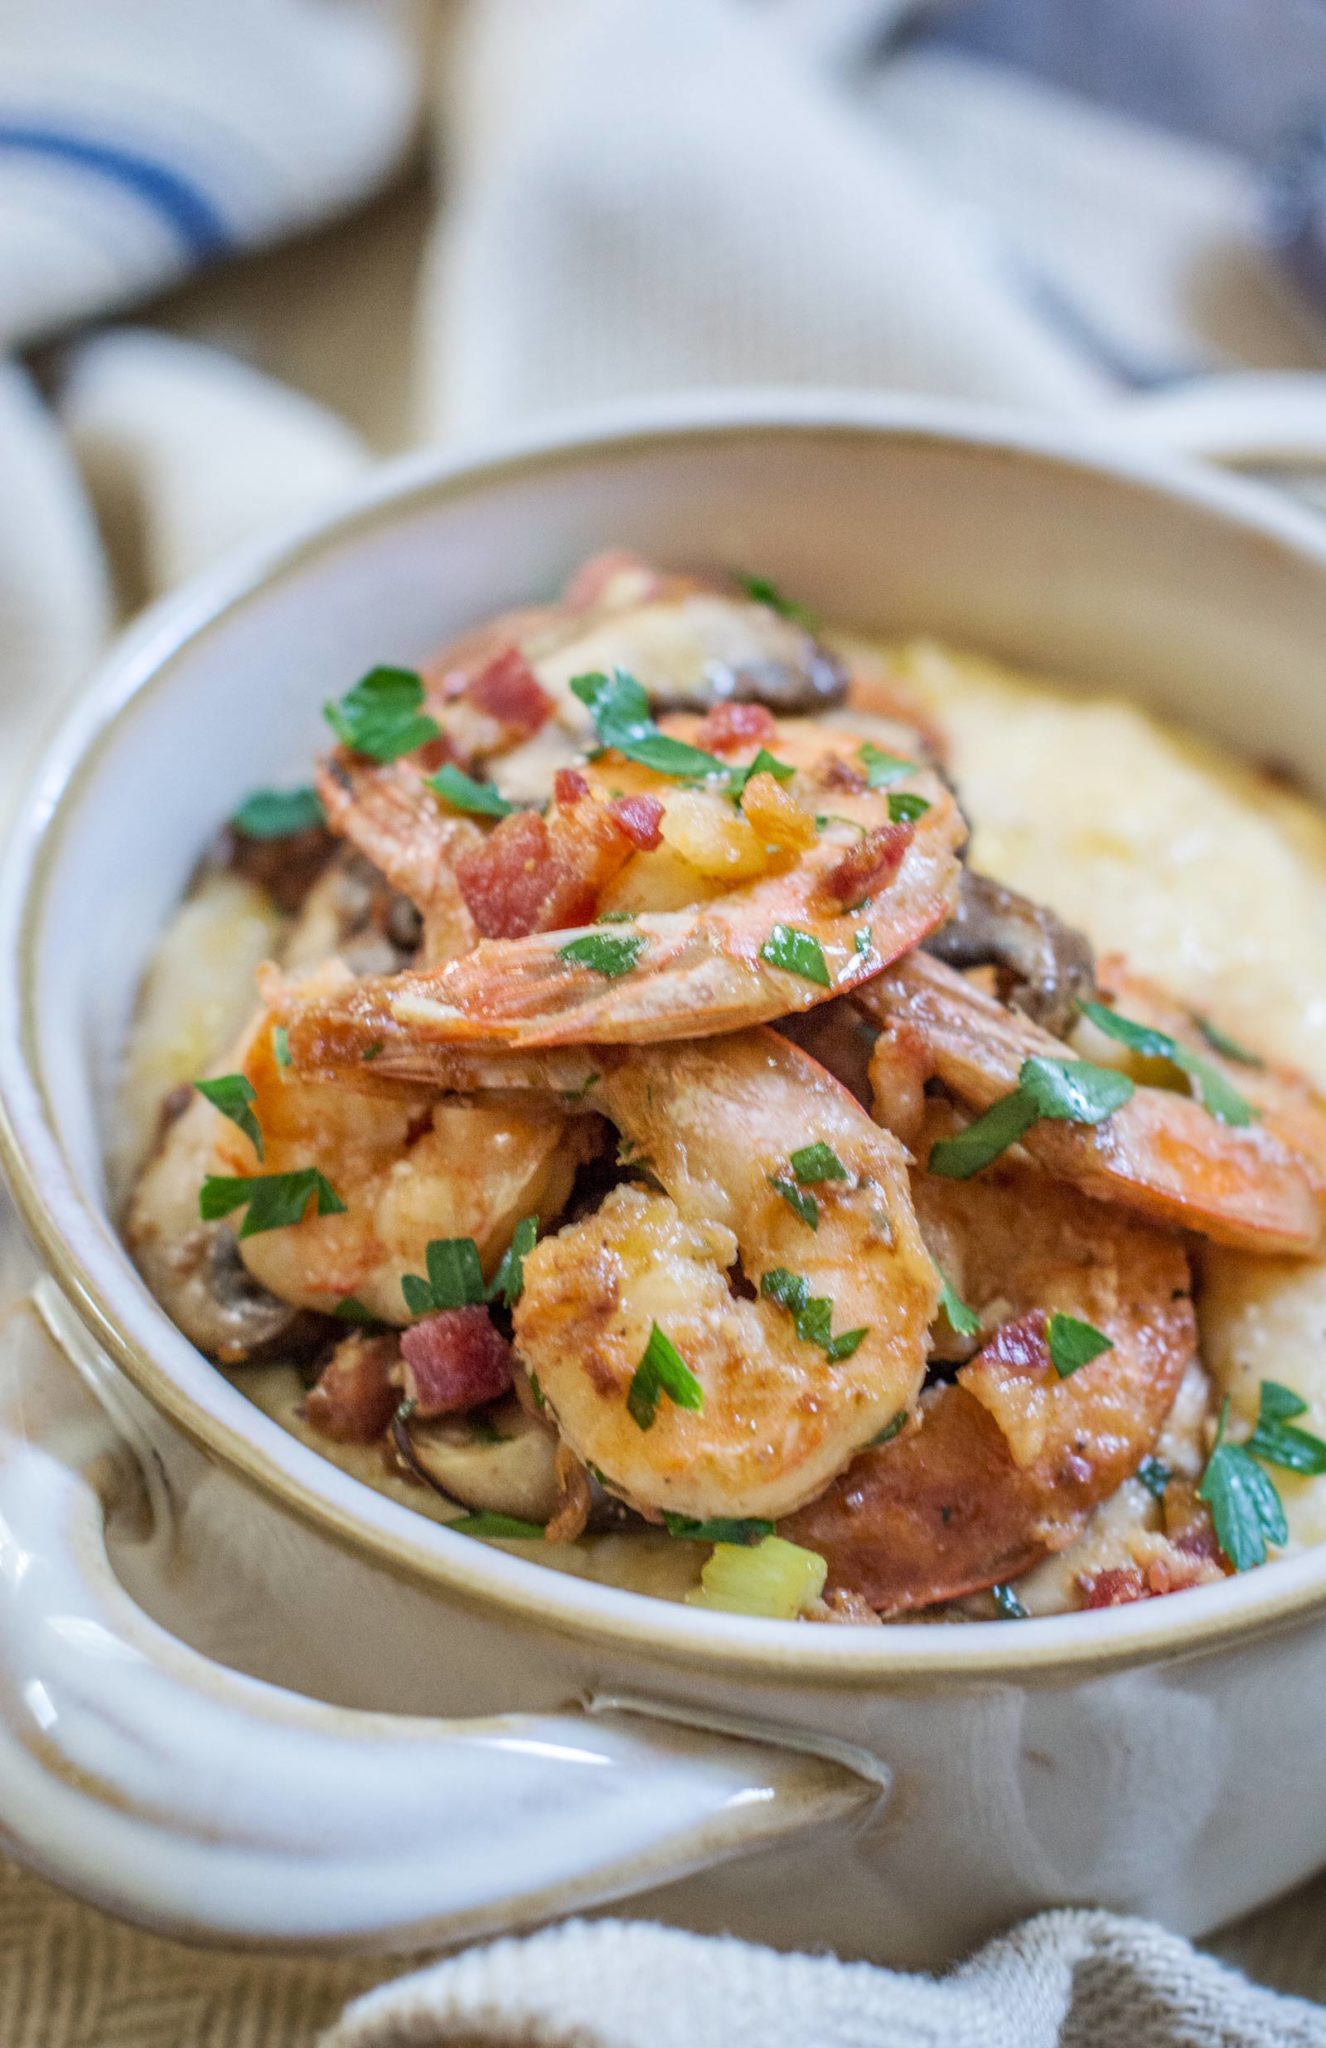 Love this easy to make, Shrimp and Grits recipe! Find the recipe at Little Figgy Food and enjoy!